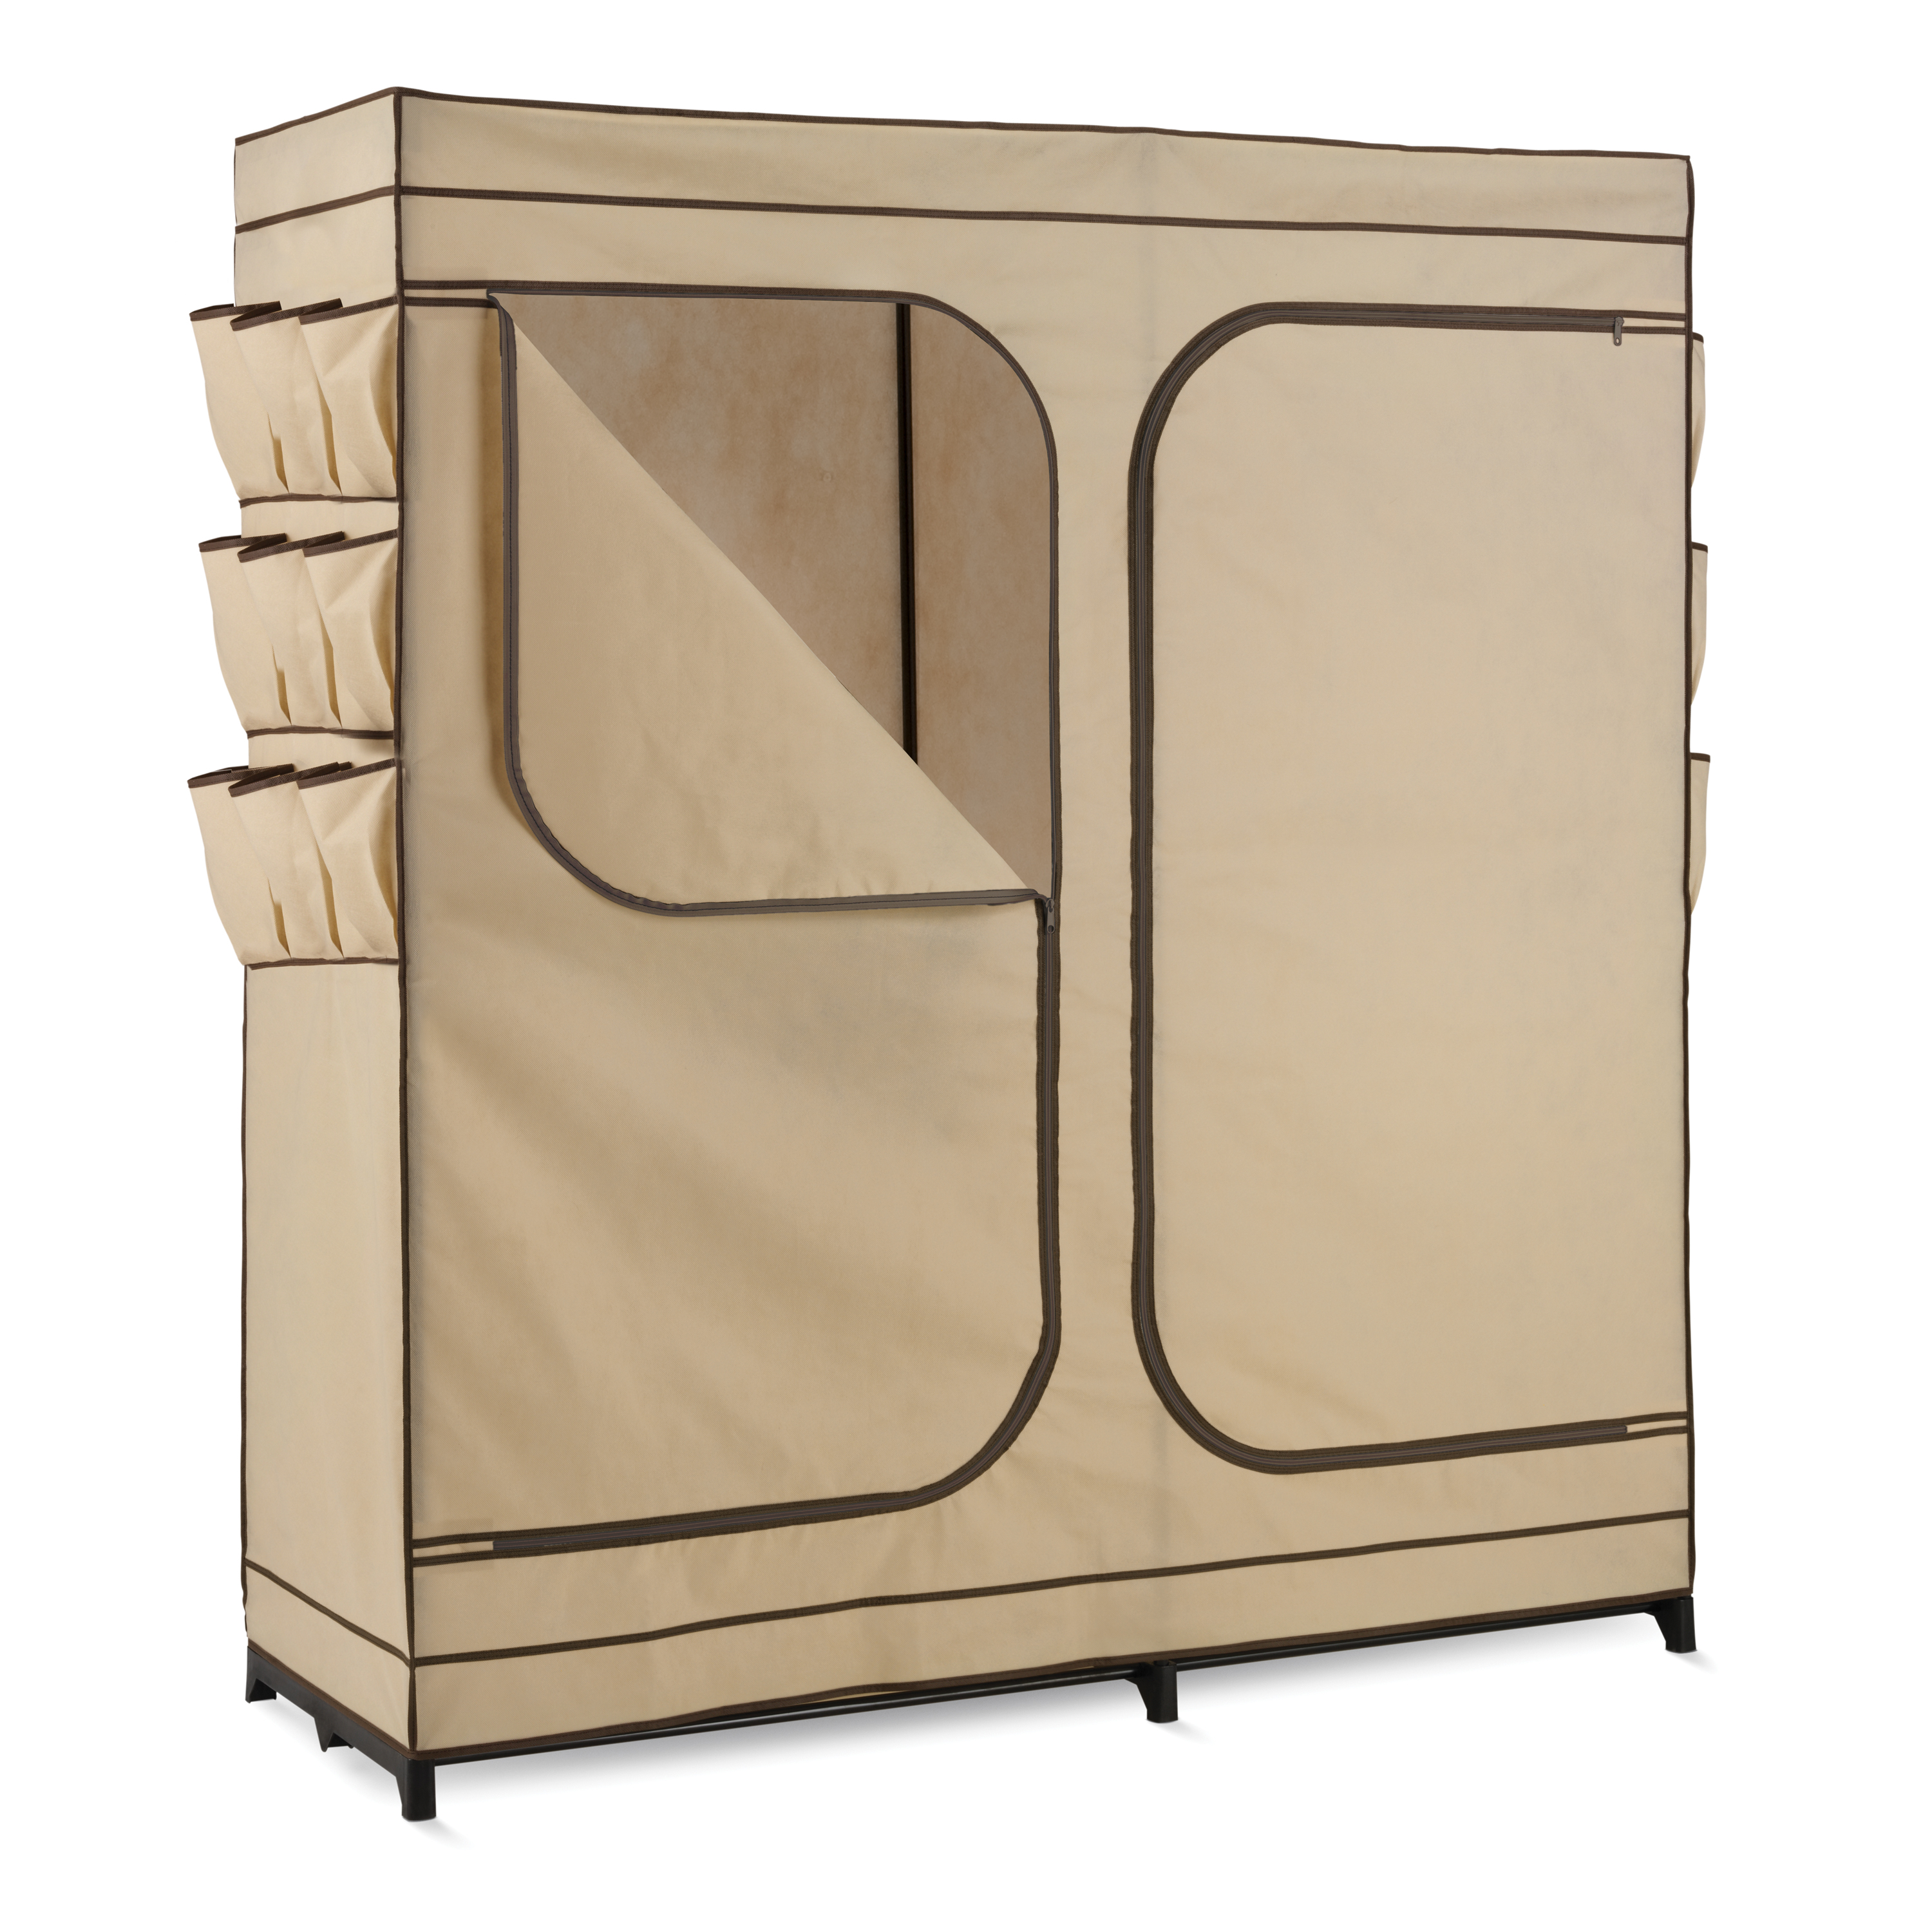 Honey Can Do Portable Closet And Clothes Rack With Cover And Double Doors, Khaki, Beige - image 1 of 9